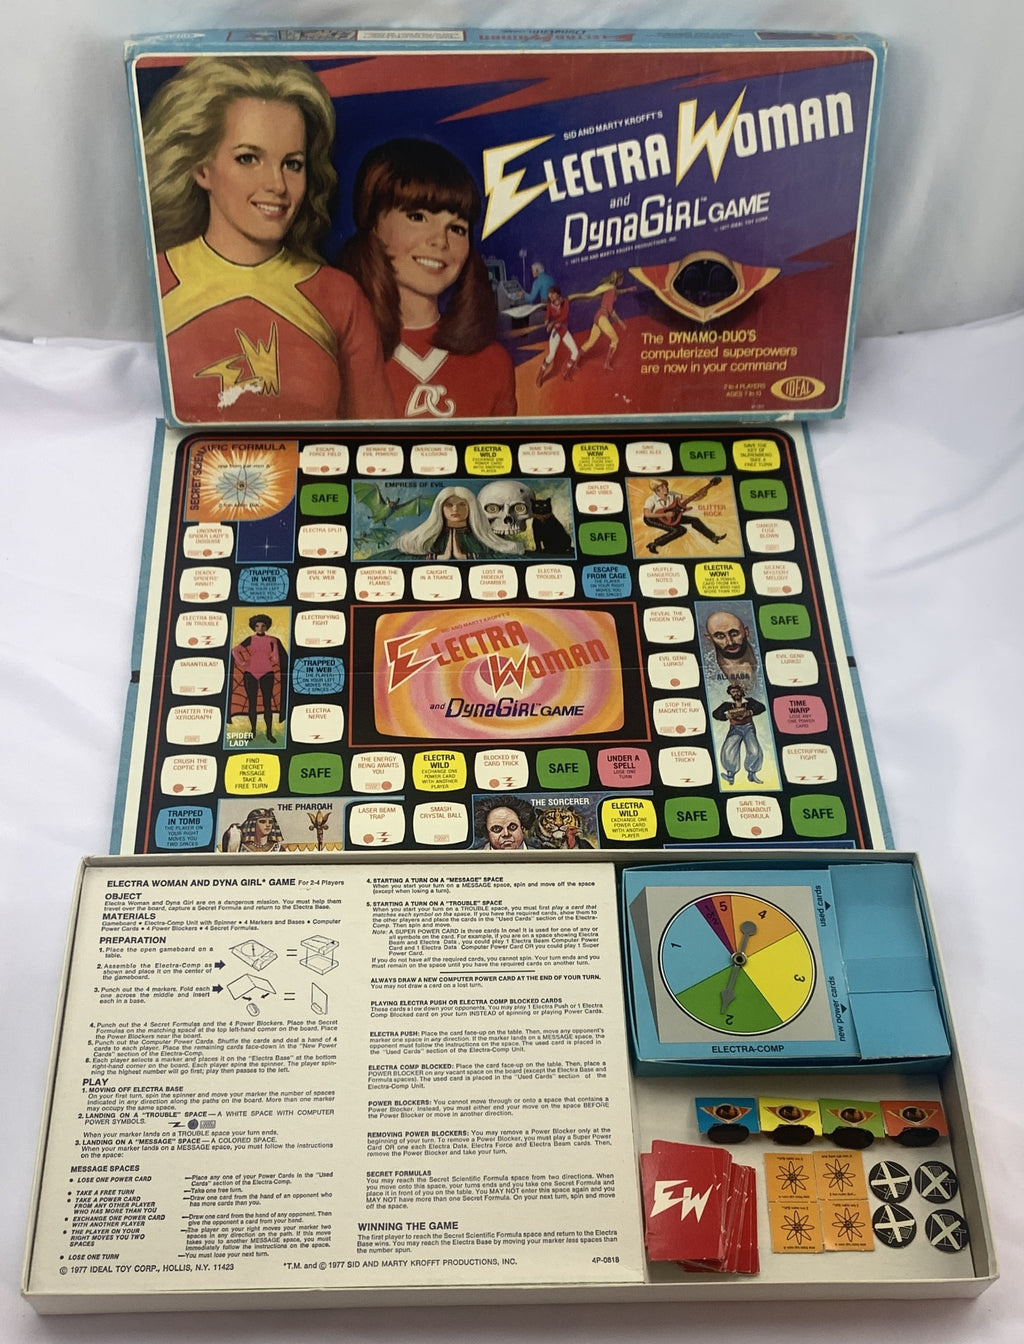 Electra Woman and Dyna Girl Game - 1977 - Ideal - Very Good Condition